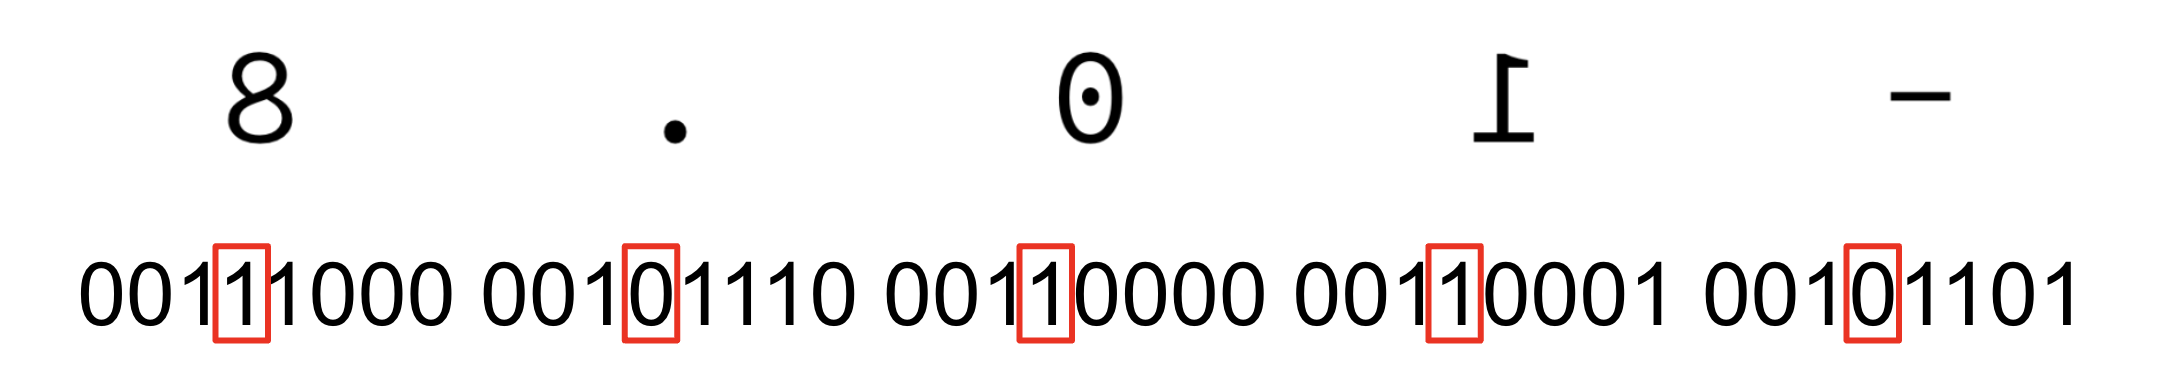 Image shows the little-endian order of ASCII bytes that spell out -10.8.
Bit number 4 in each byte is marked with a red rectangle.